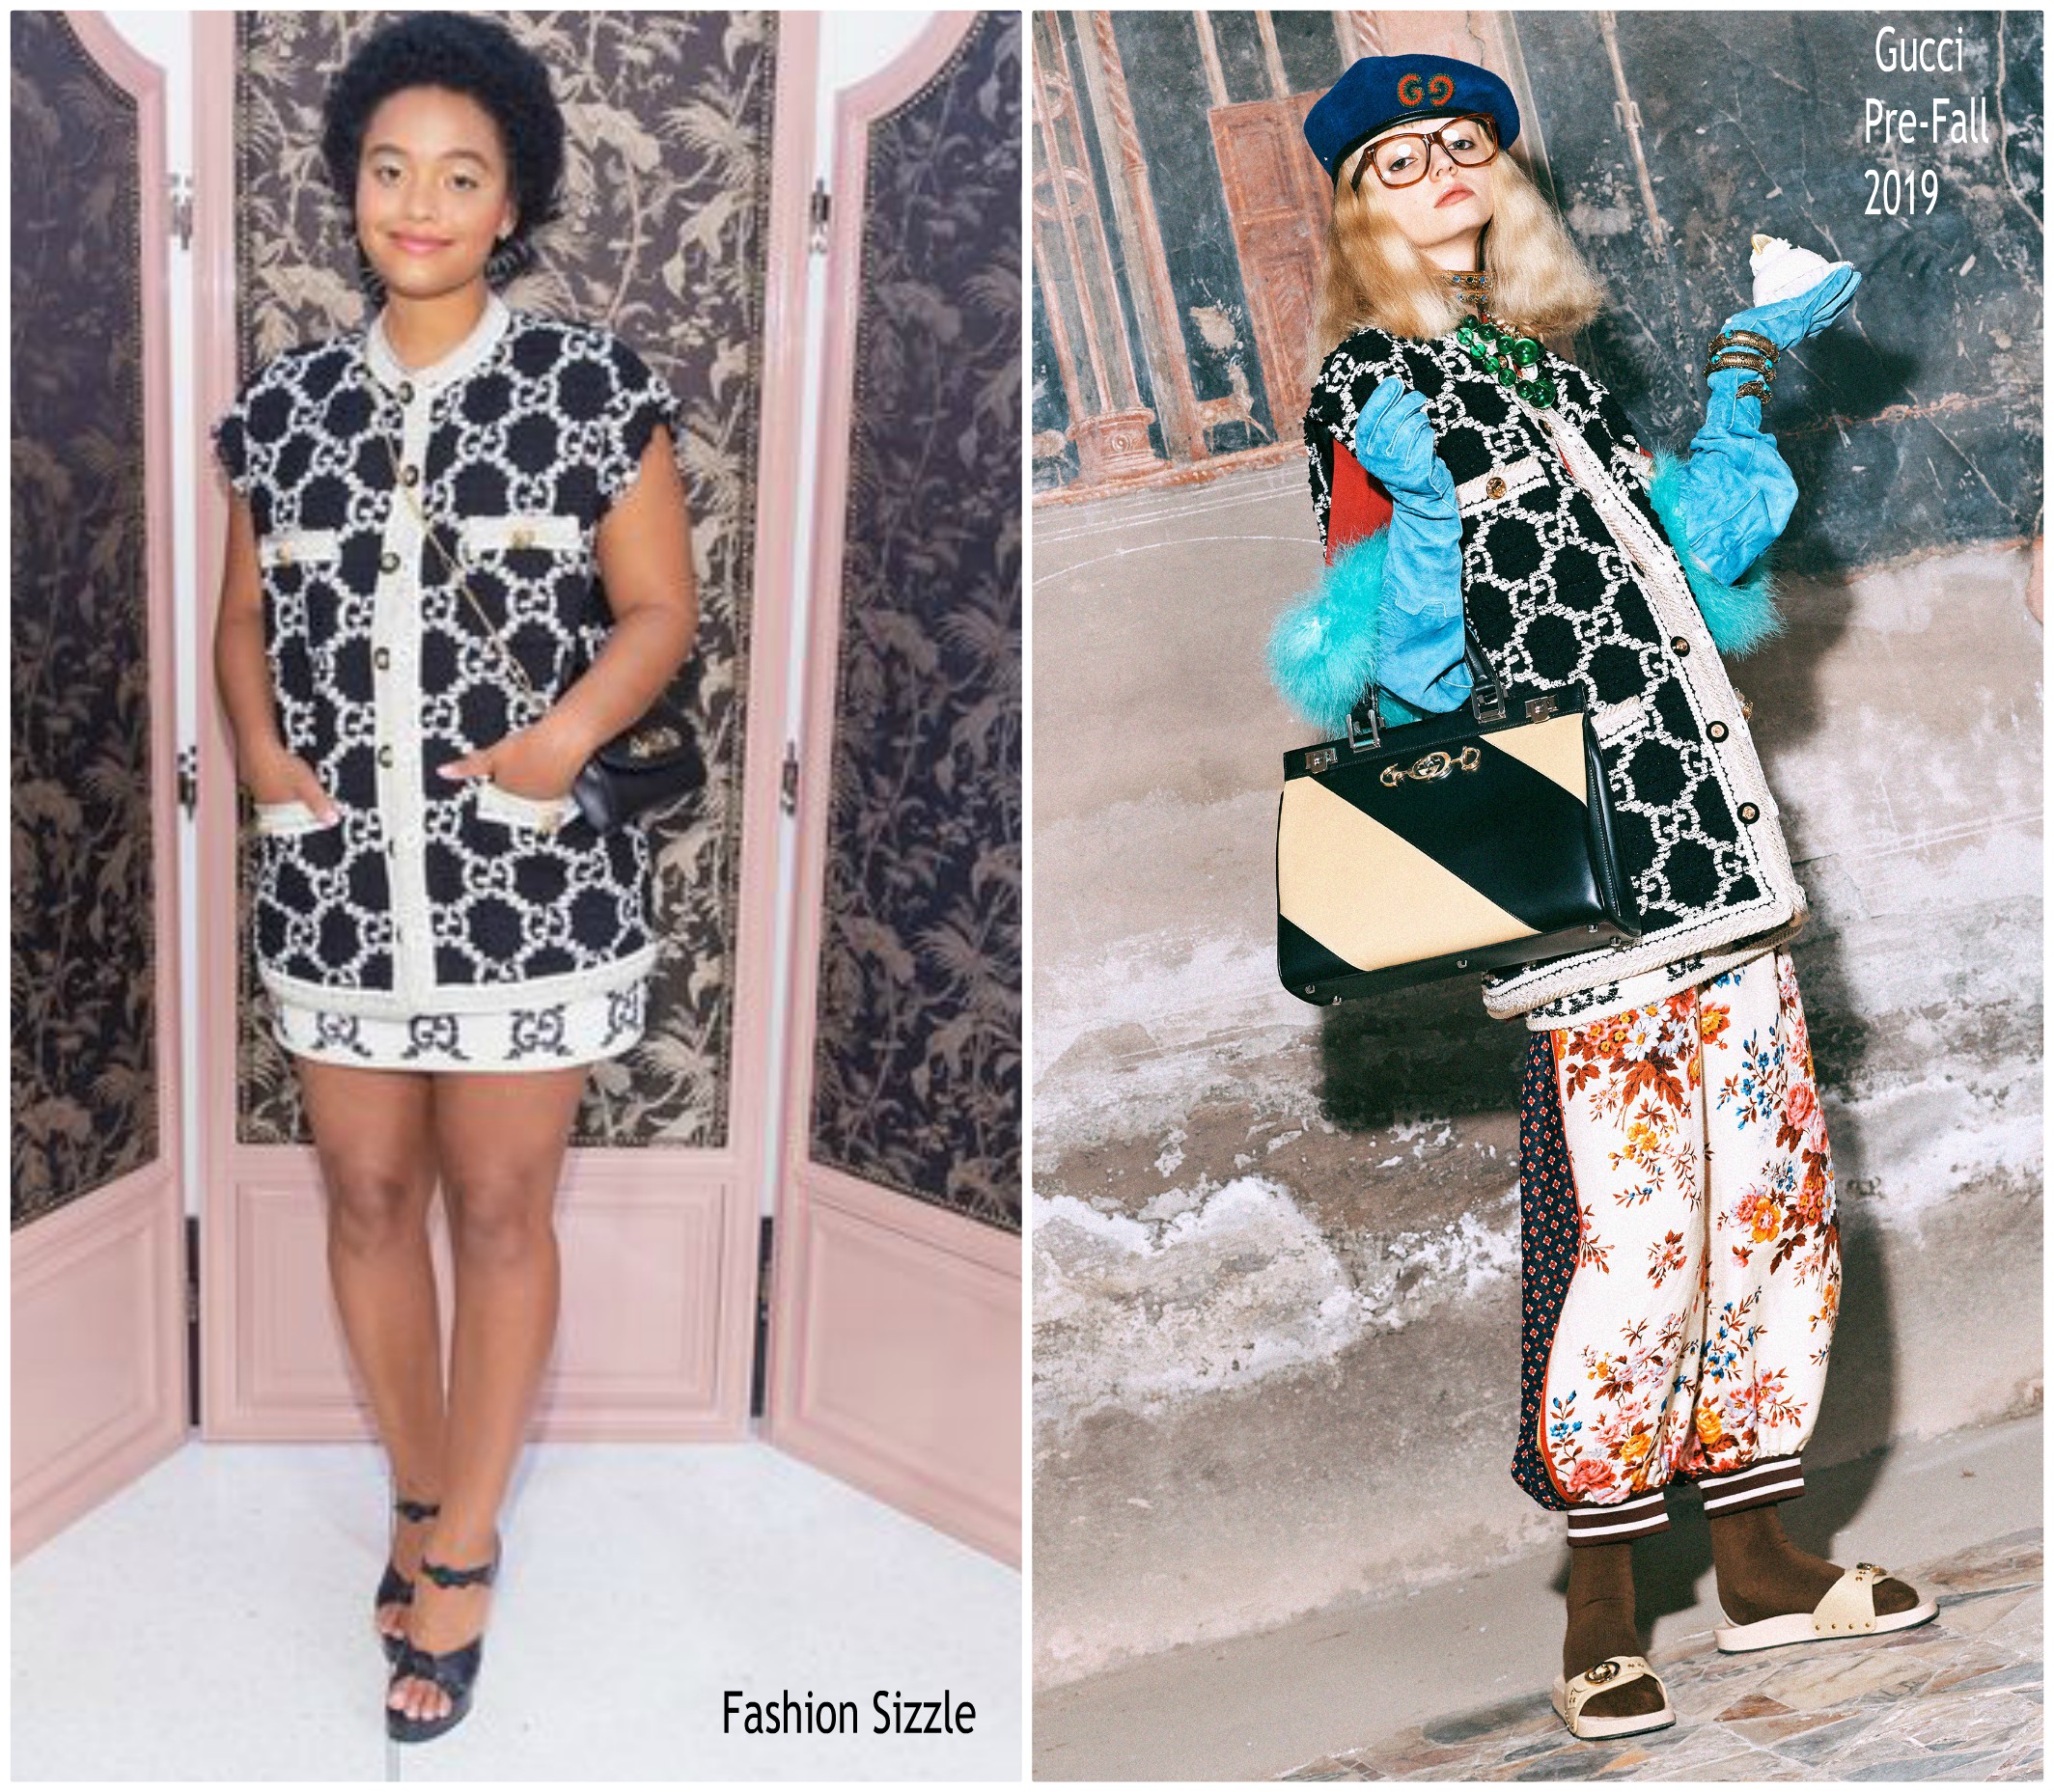 Kiersey Clemons In Gucci @ Gucci & Nordstorm Event In Seattle